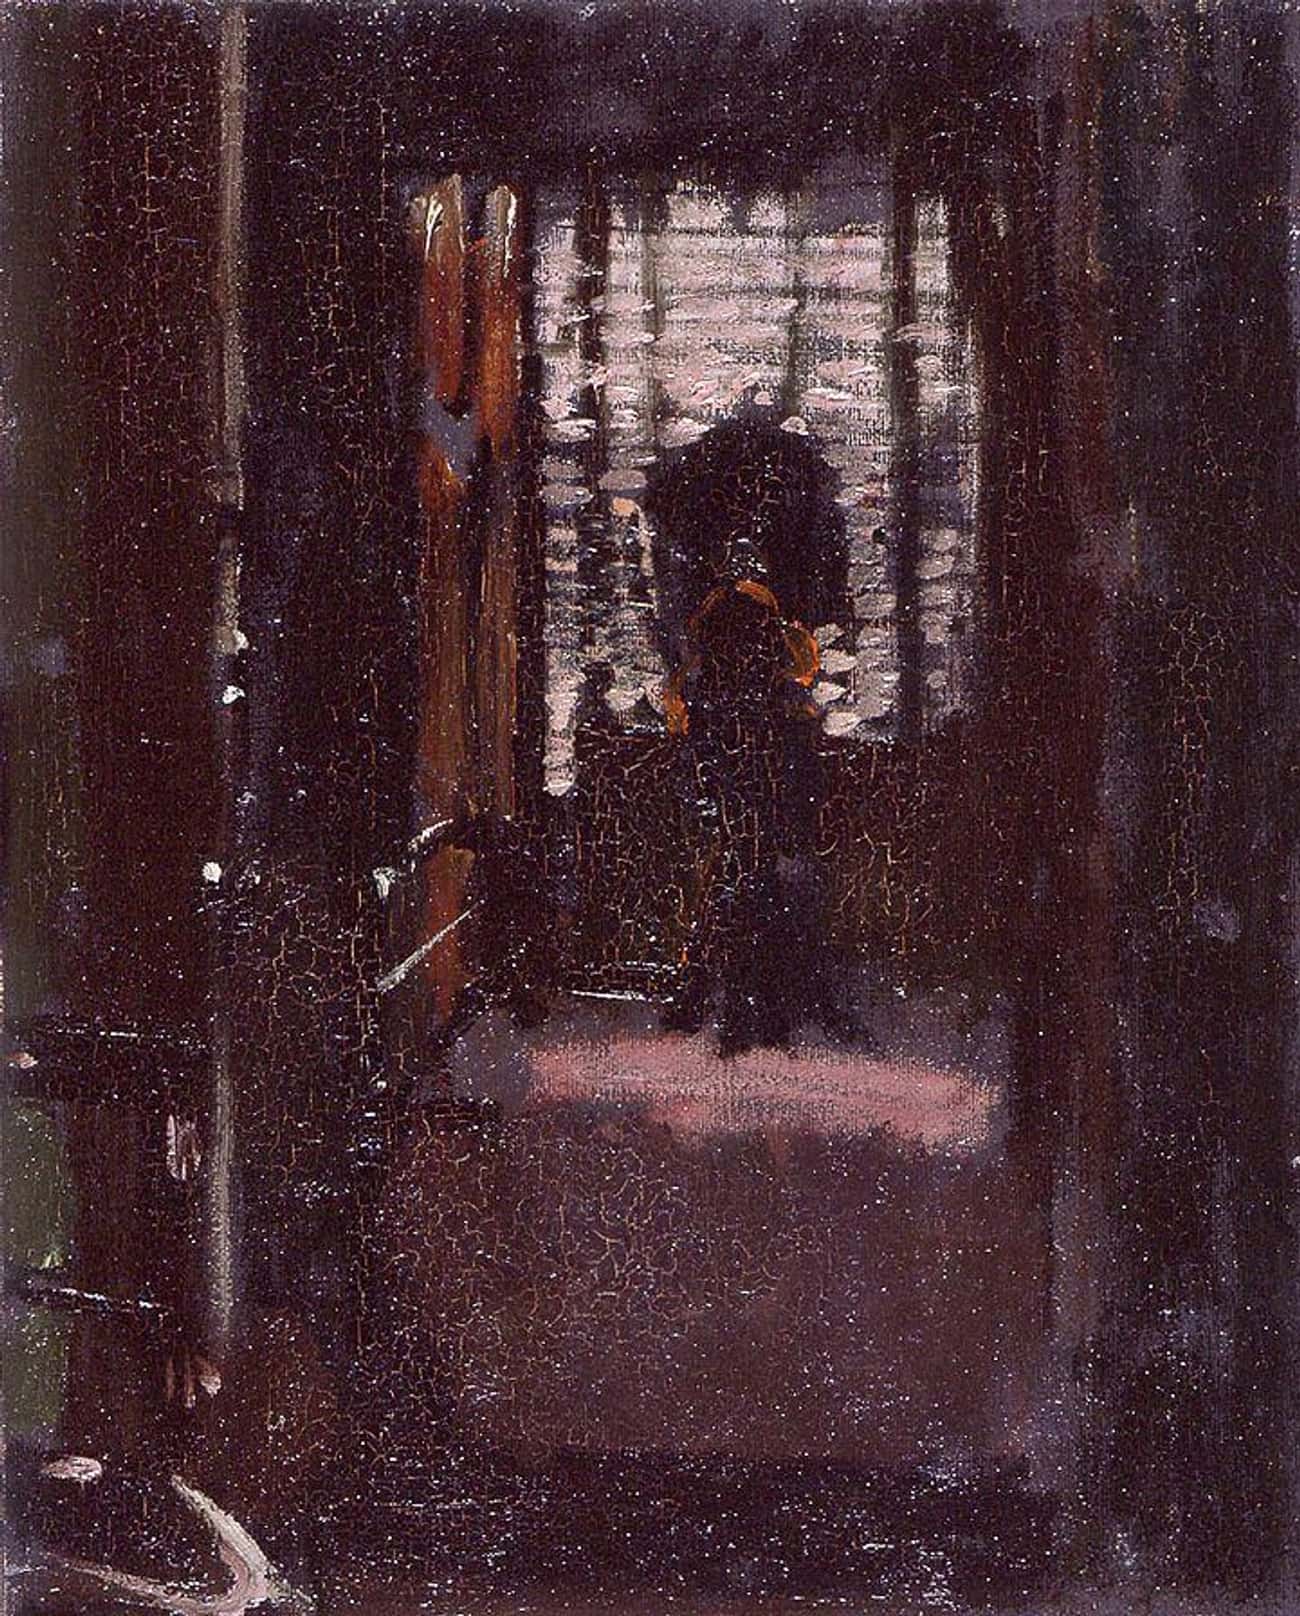 Walter Sickert Rented A Room Once Occupied By The Murderer